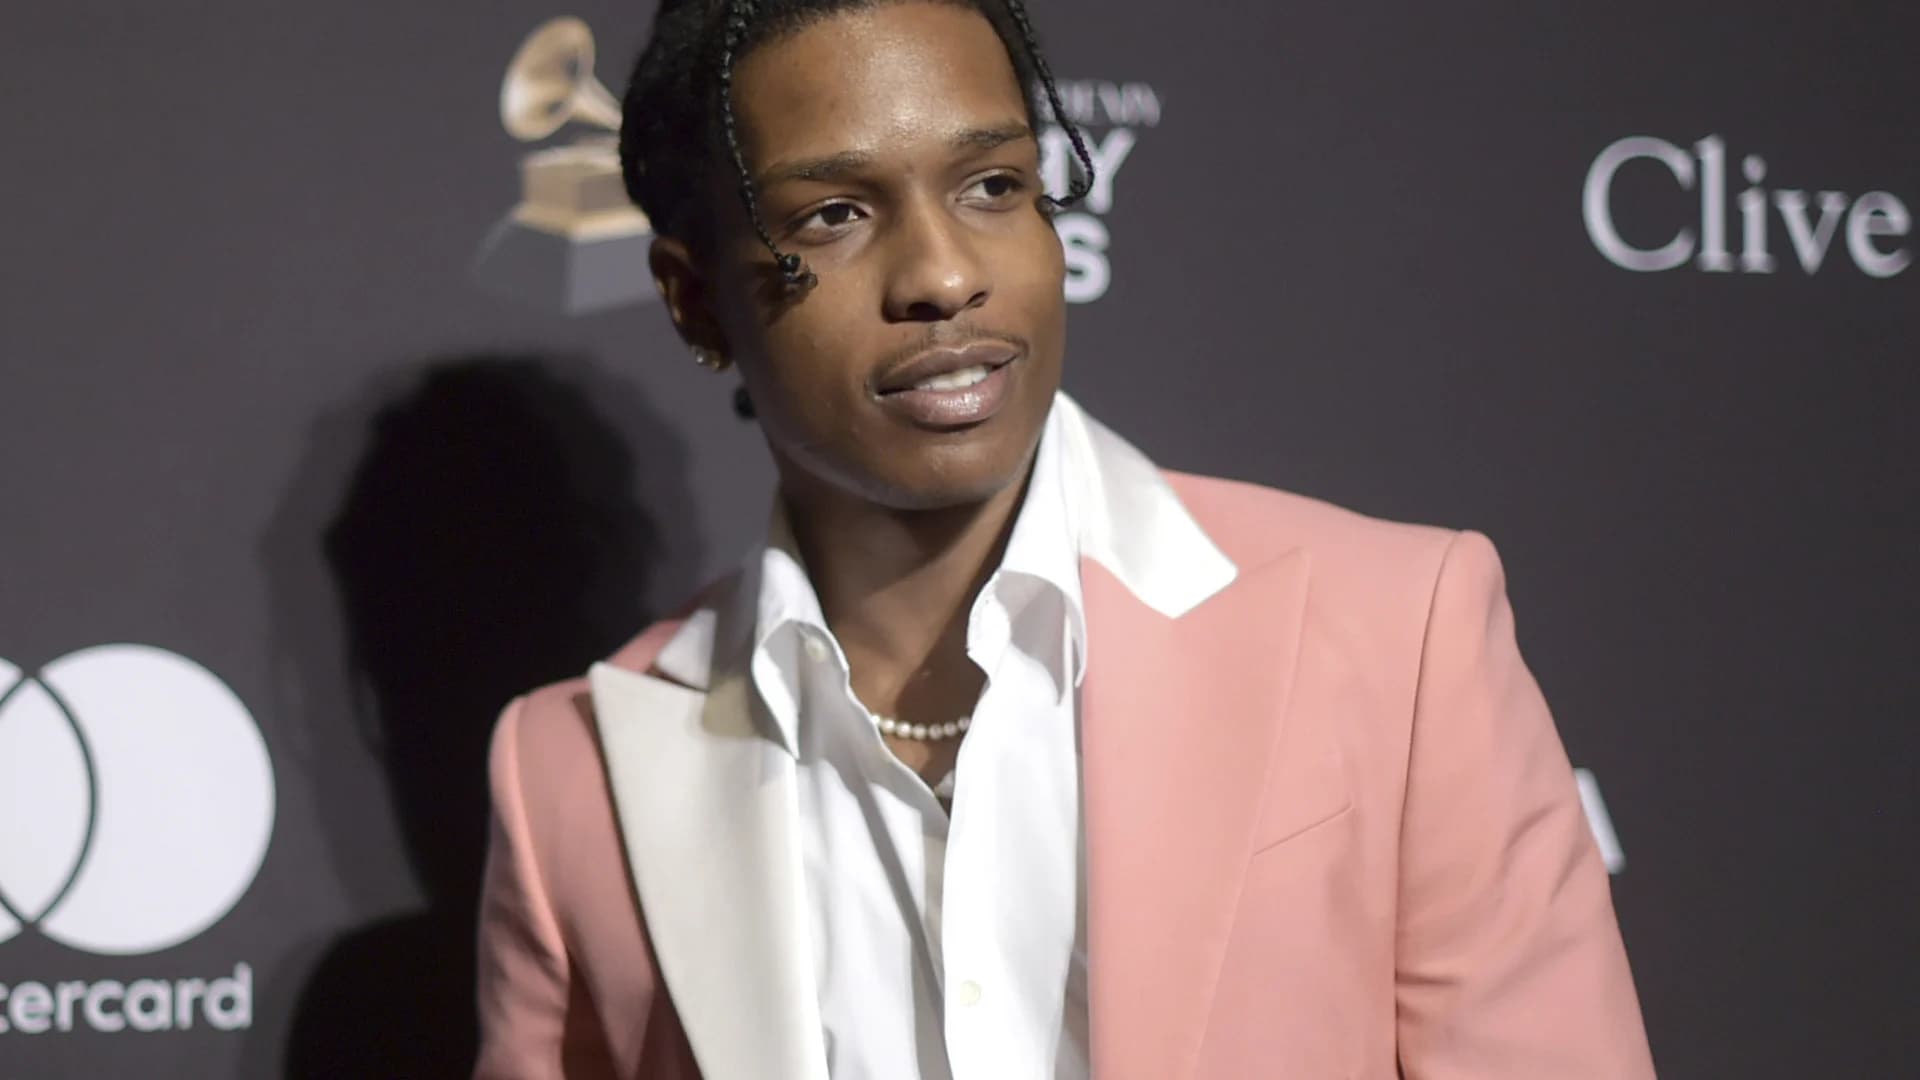 Rapper A$AP Rocky arrested at LAX in 2021 shooting